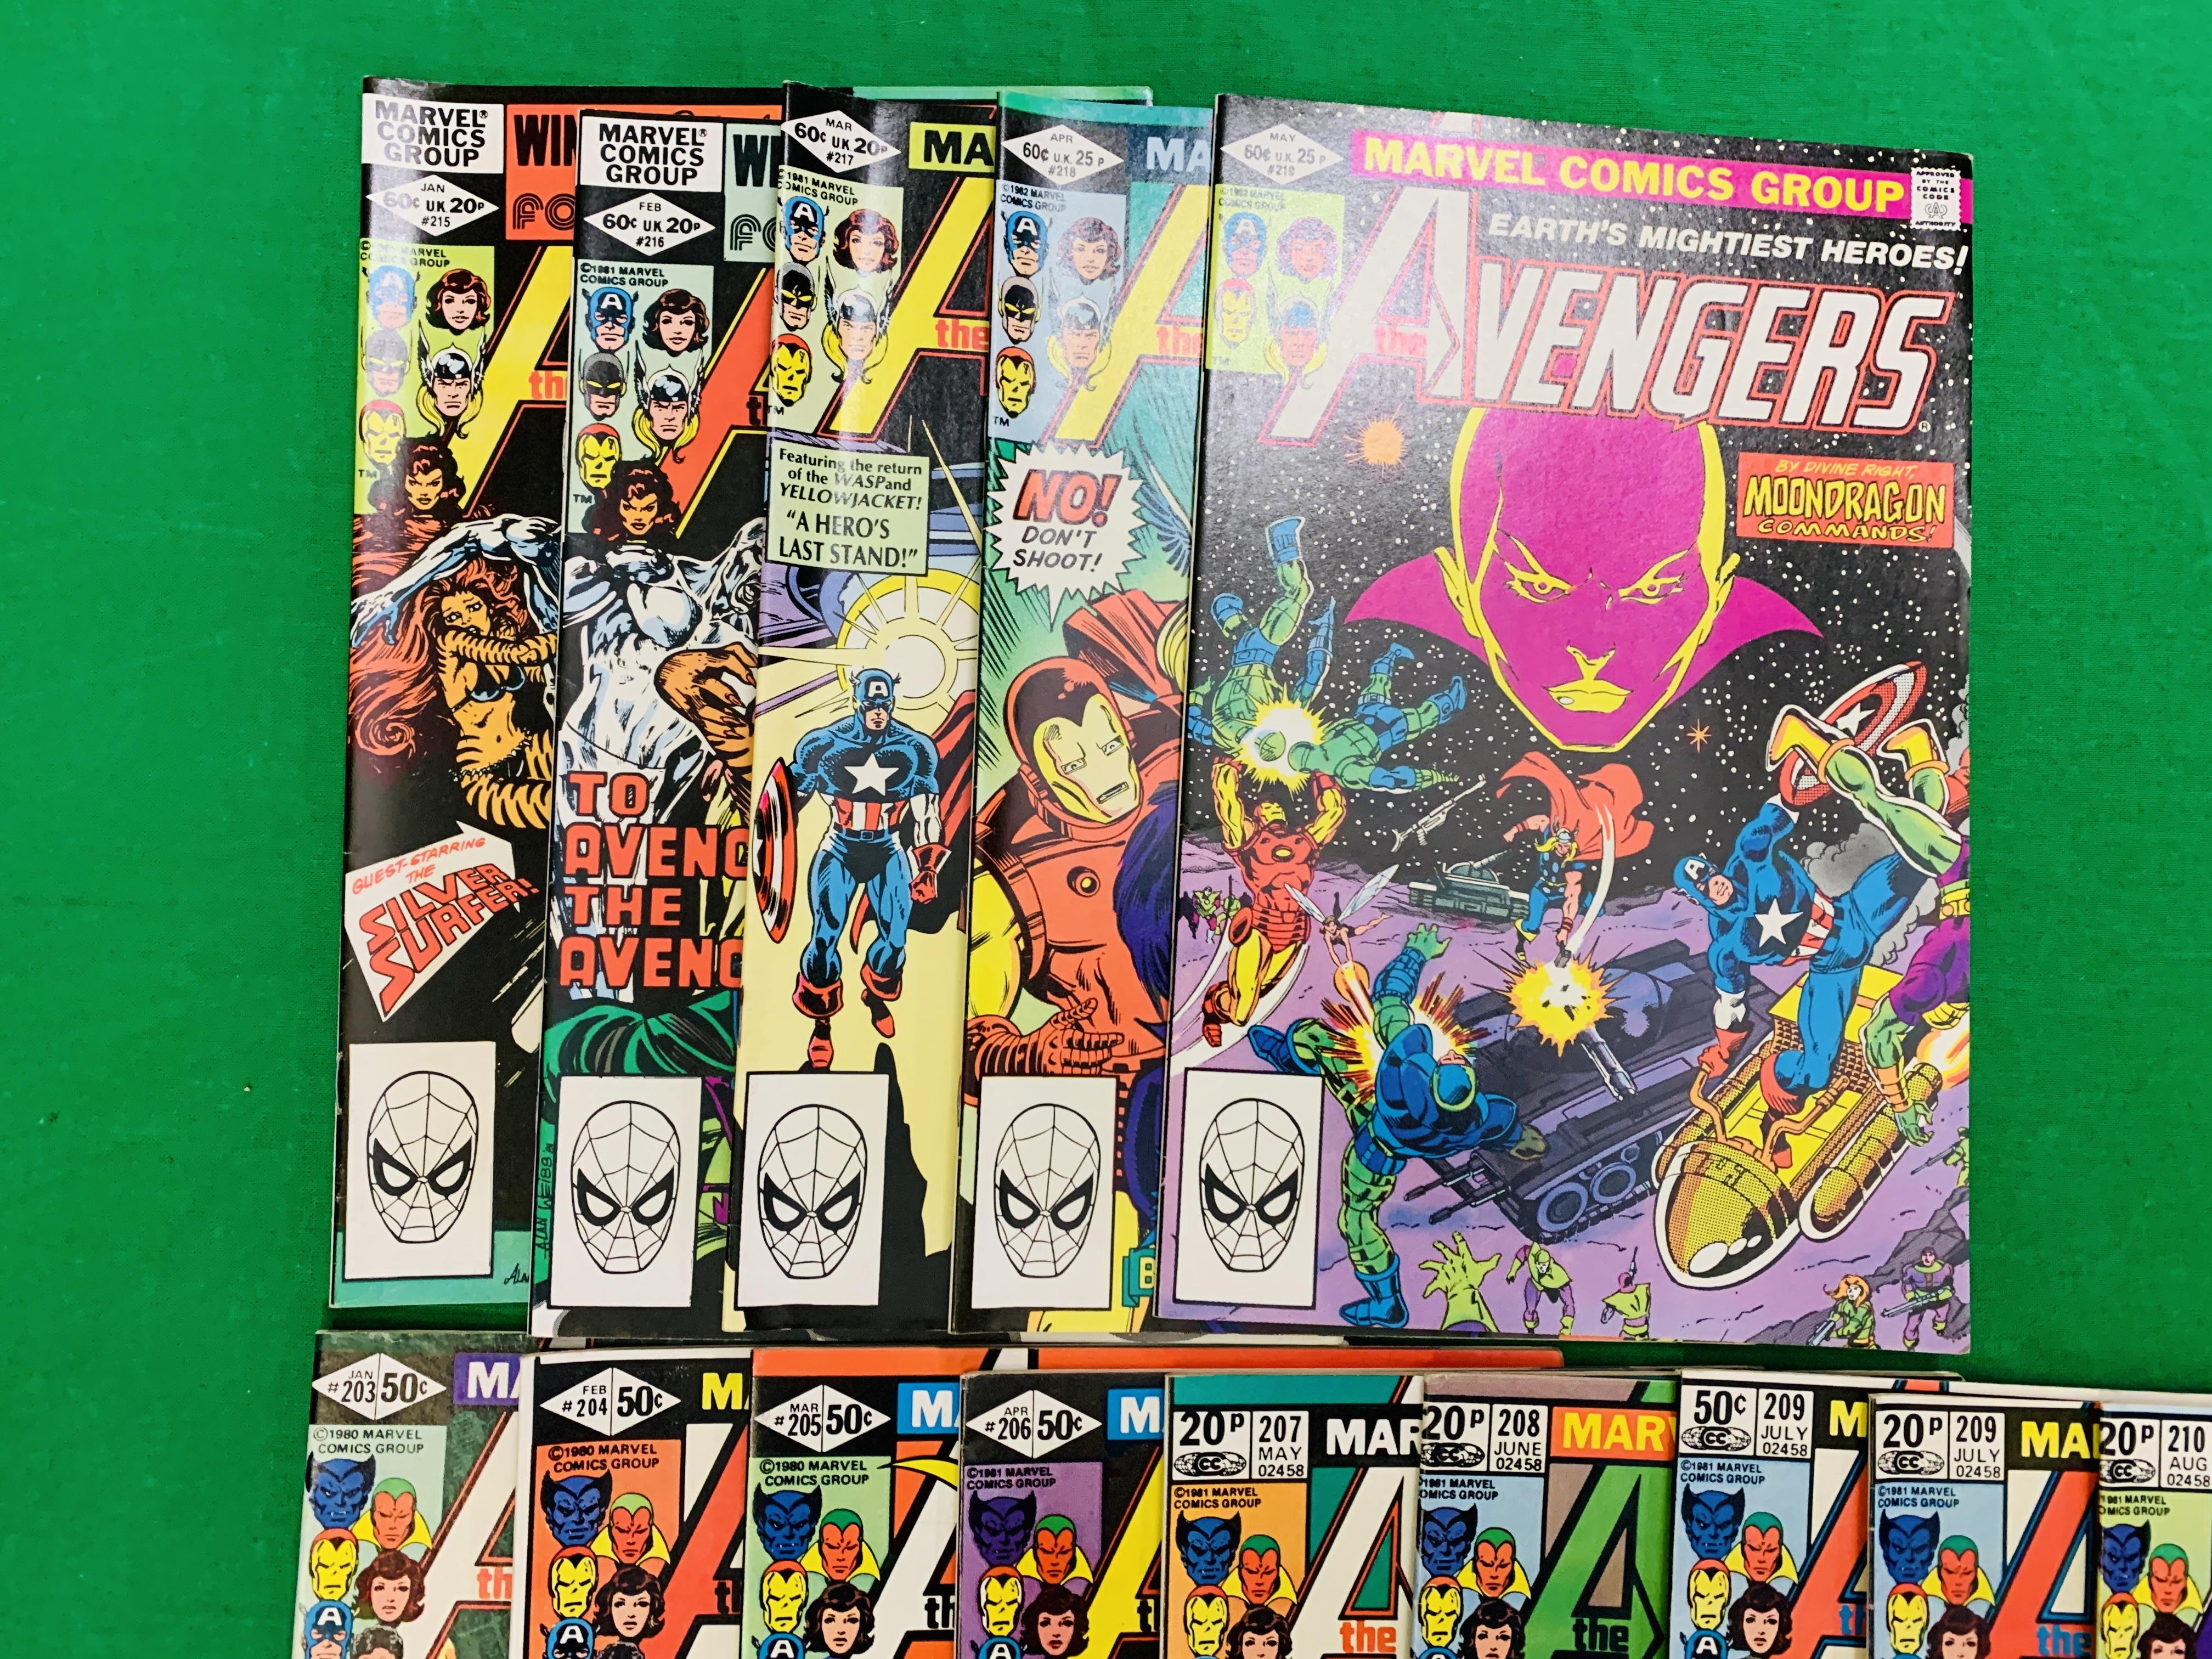 MARVEL COMICS THE AVENGERS NO. 101 - 299, MISSING ISSUES 103 AND 110. - Image 109 of 130